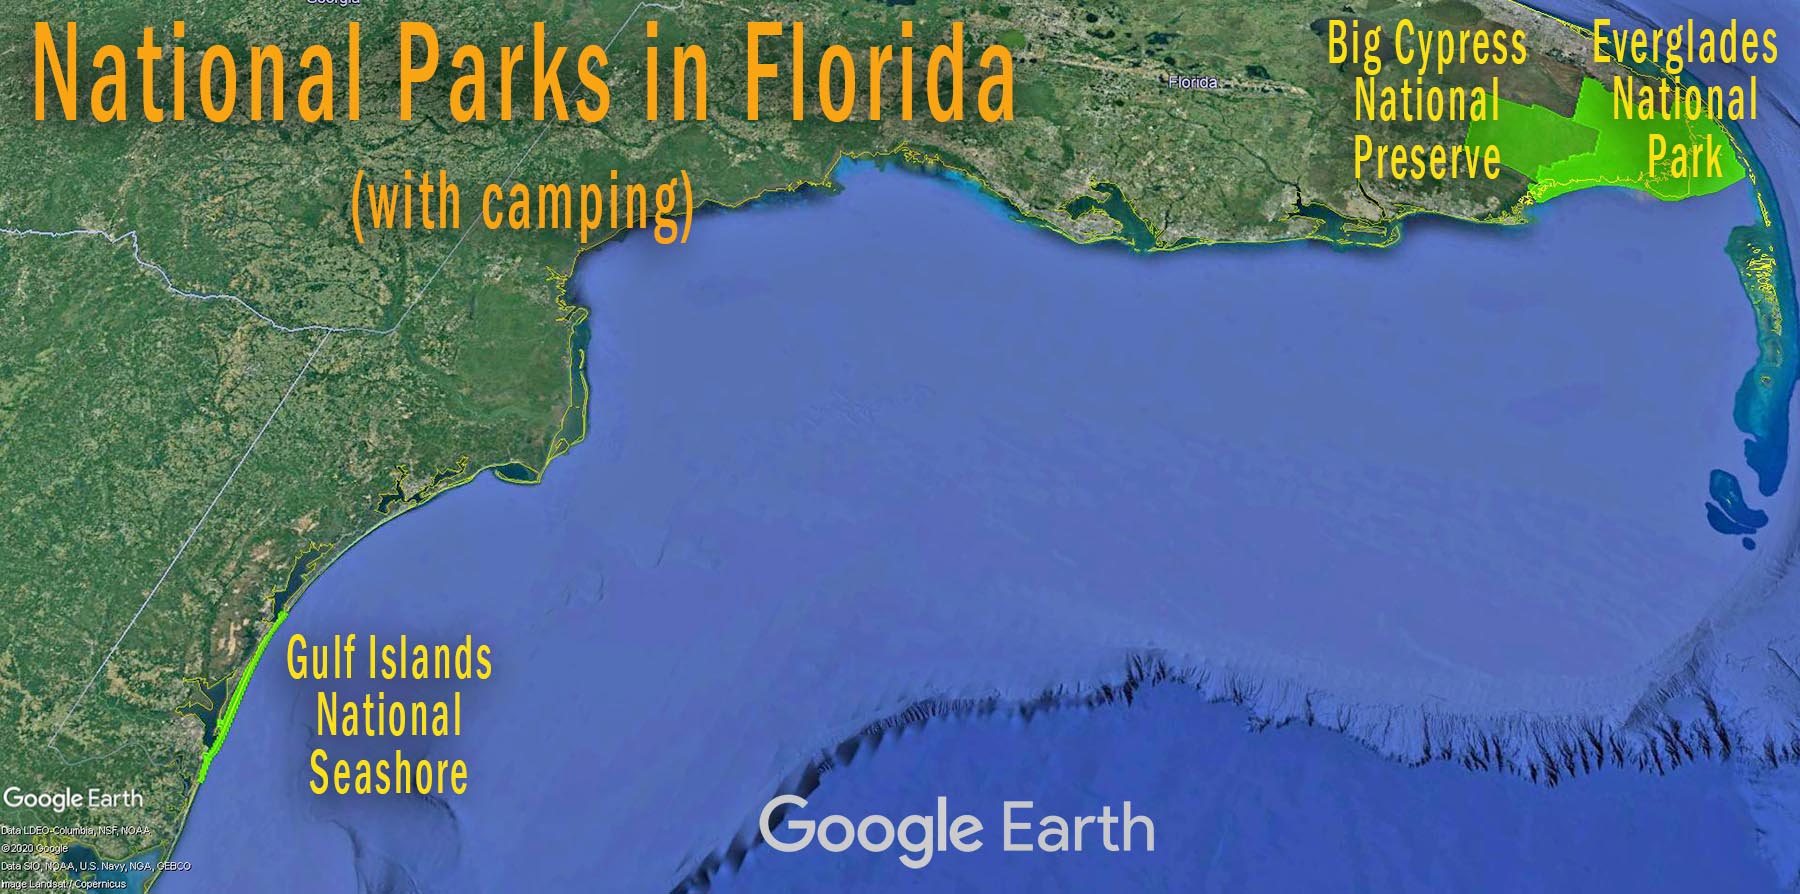 Free or Cheap Camping - Florida - National Parks Service - Part 4